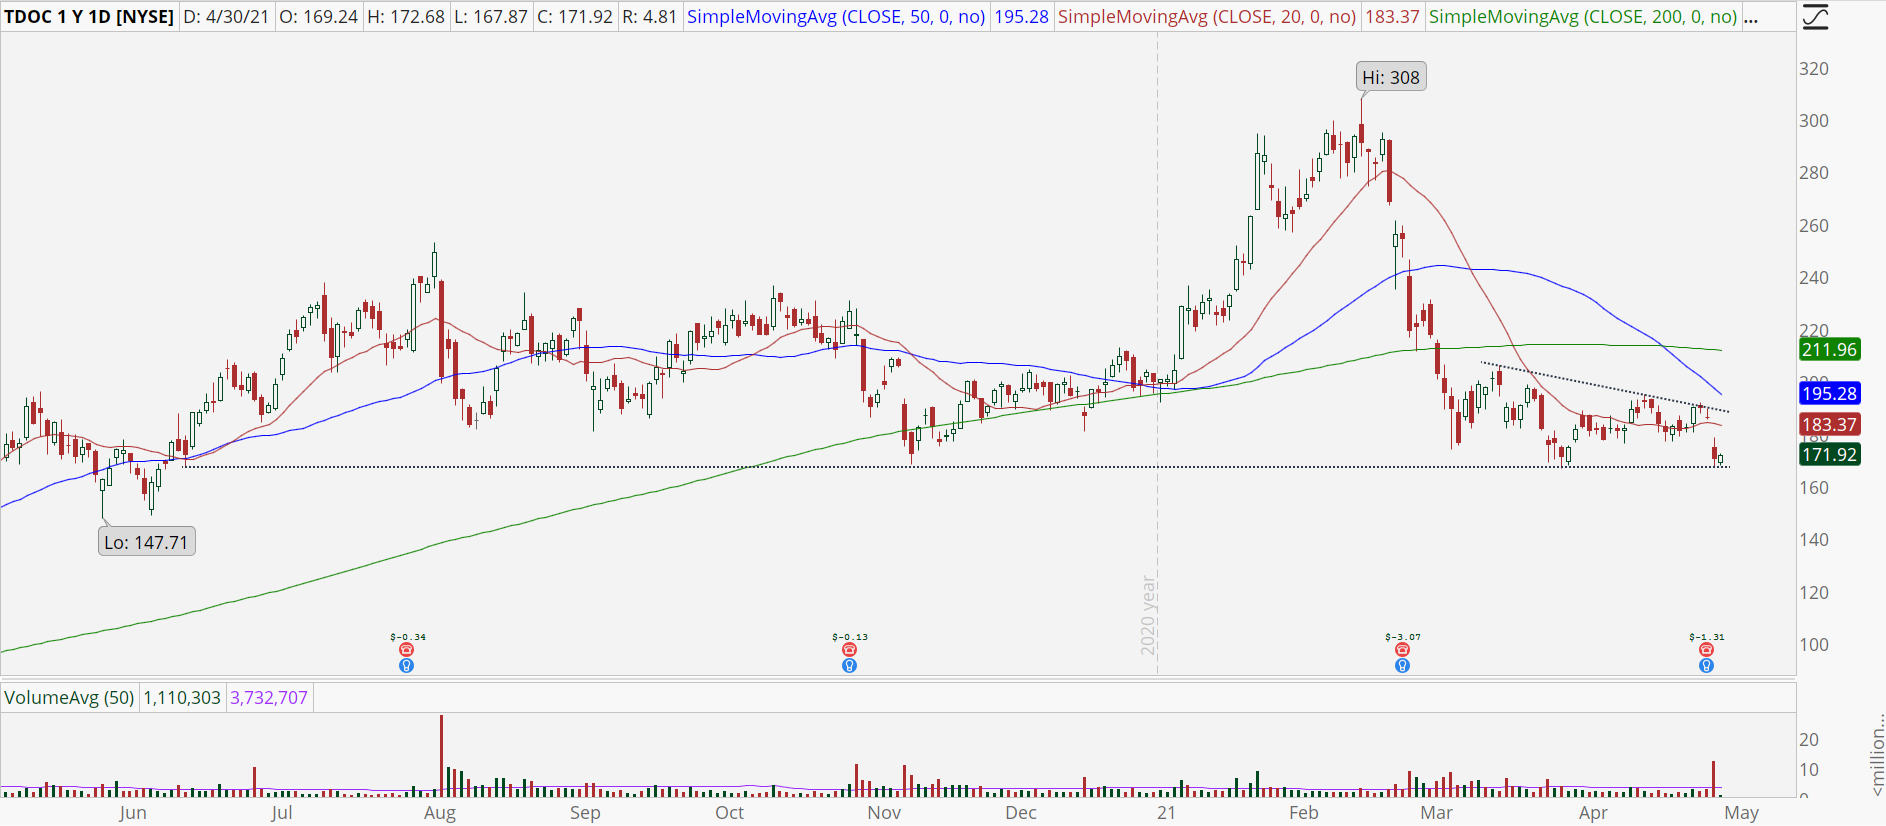 Teladoc Health (TDOC) stock with looming support break